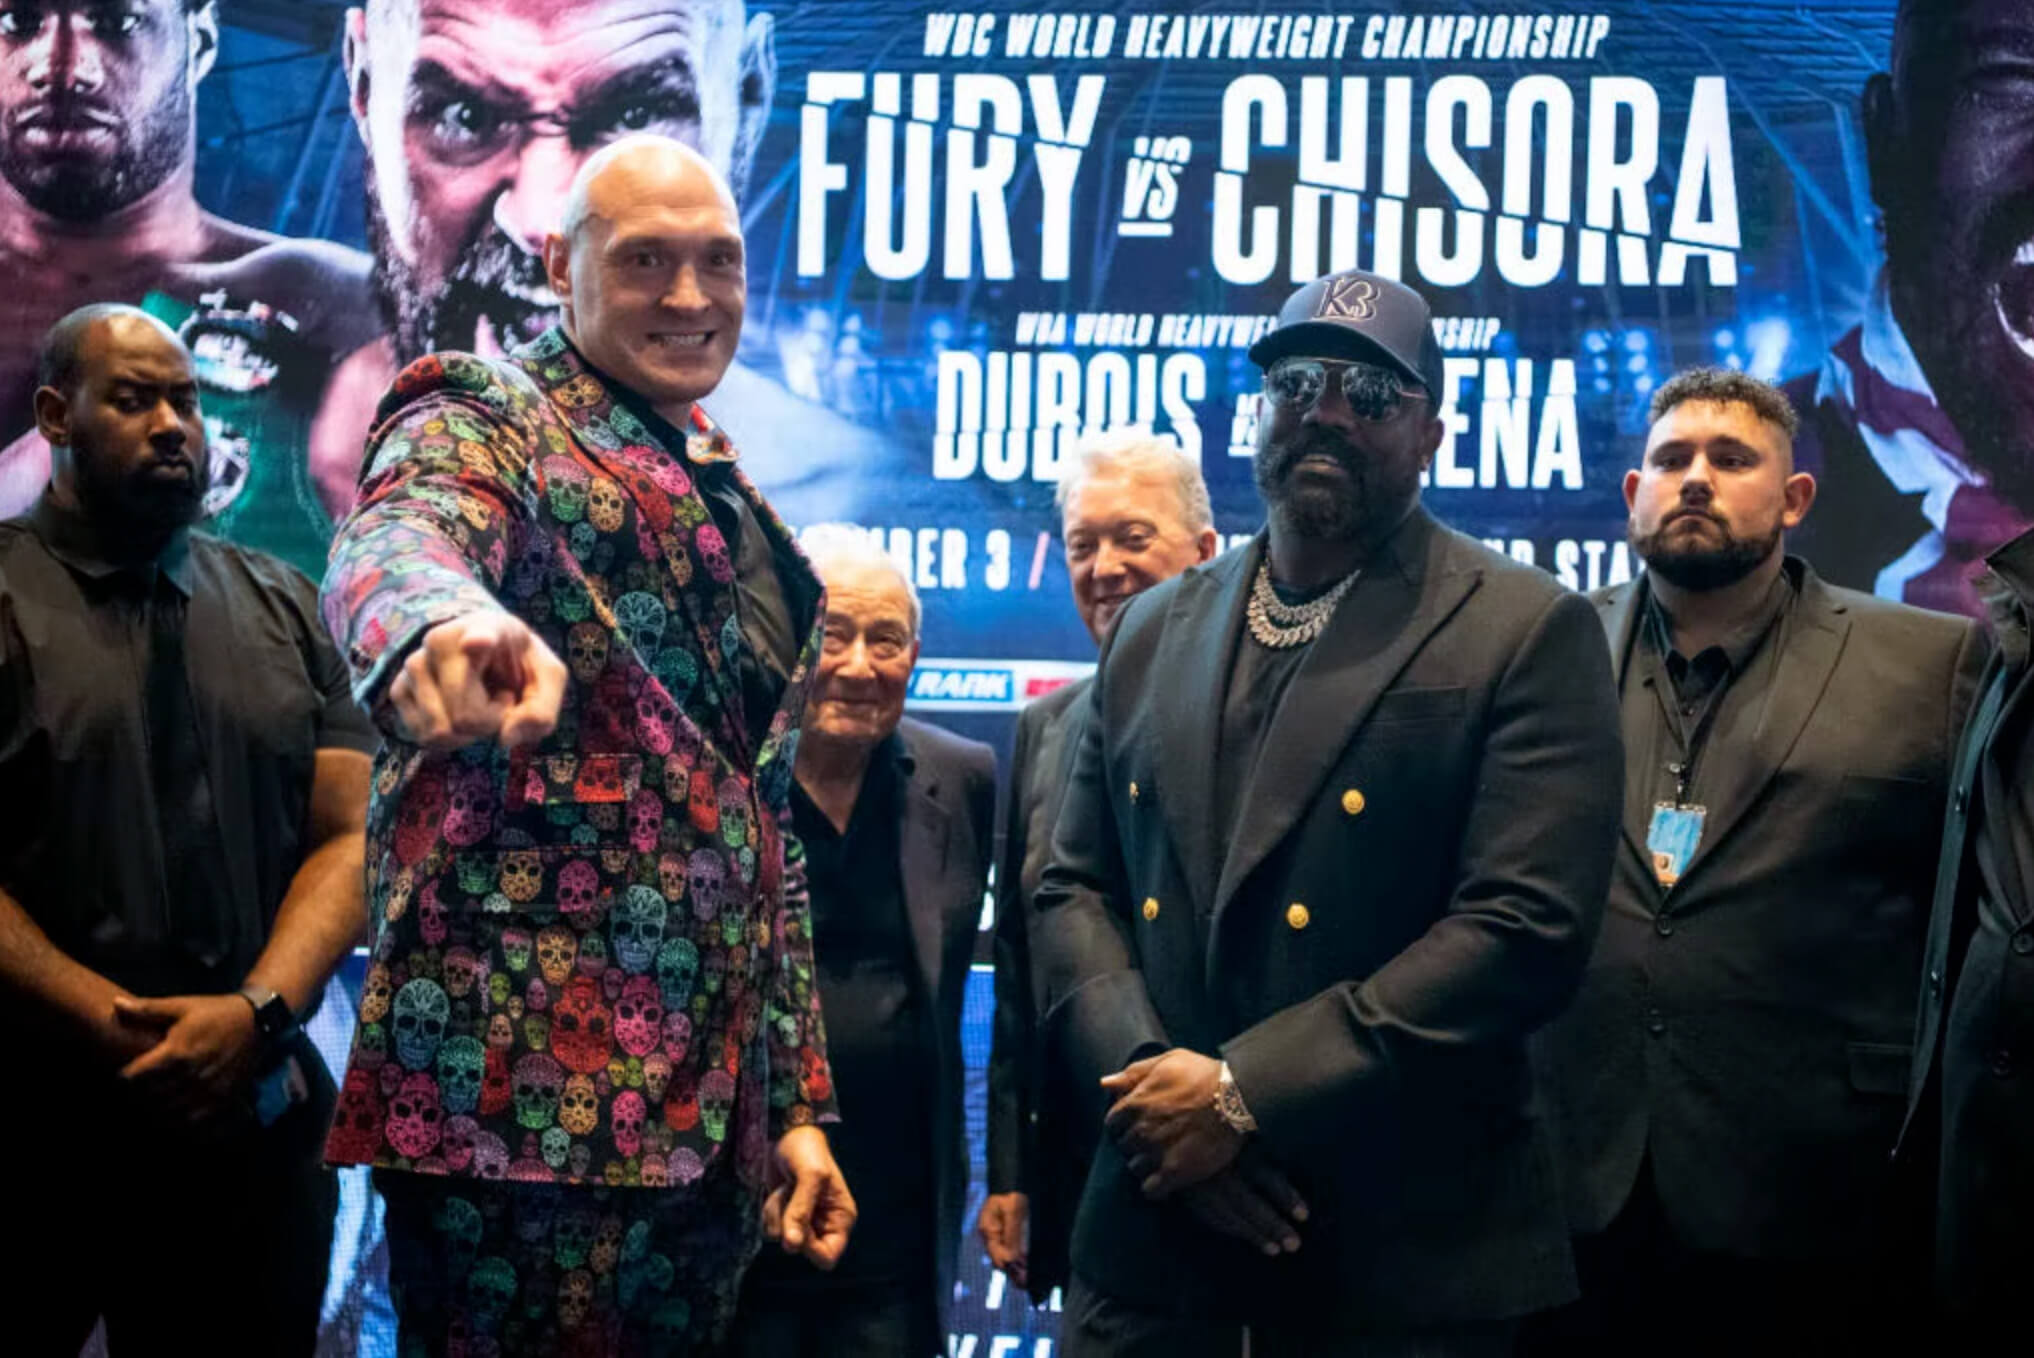 Fury - Chisora To Run It Back For A Third Time, December 3rd